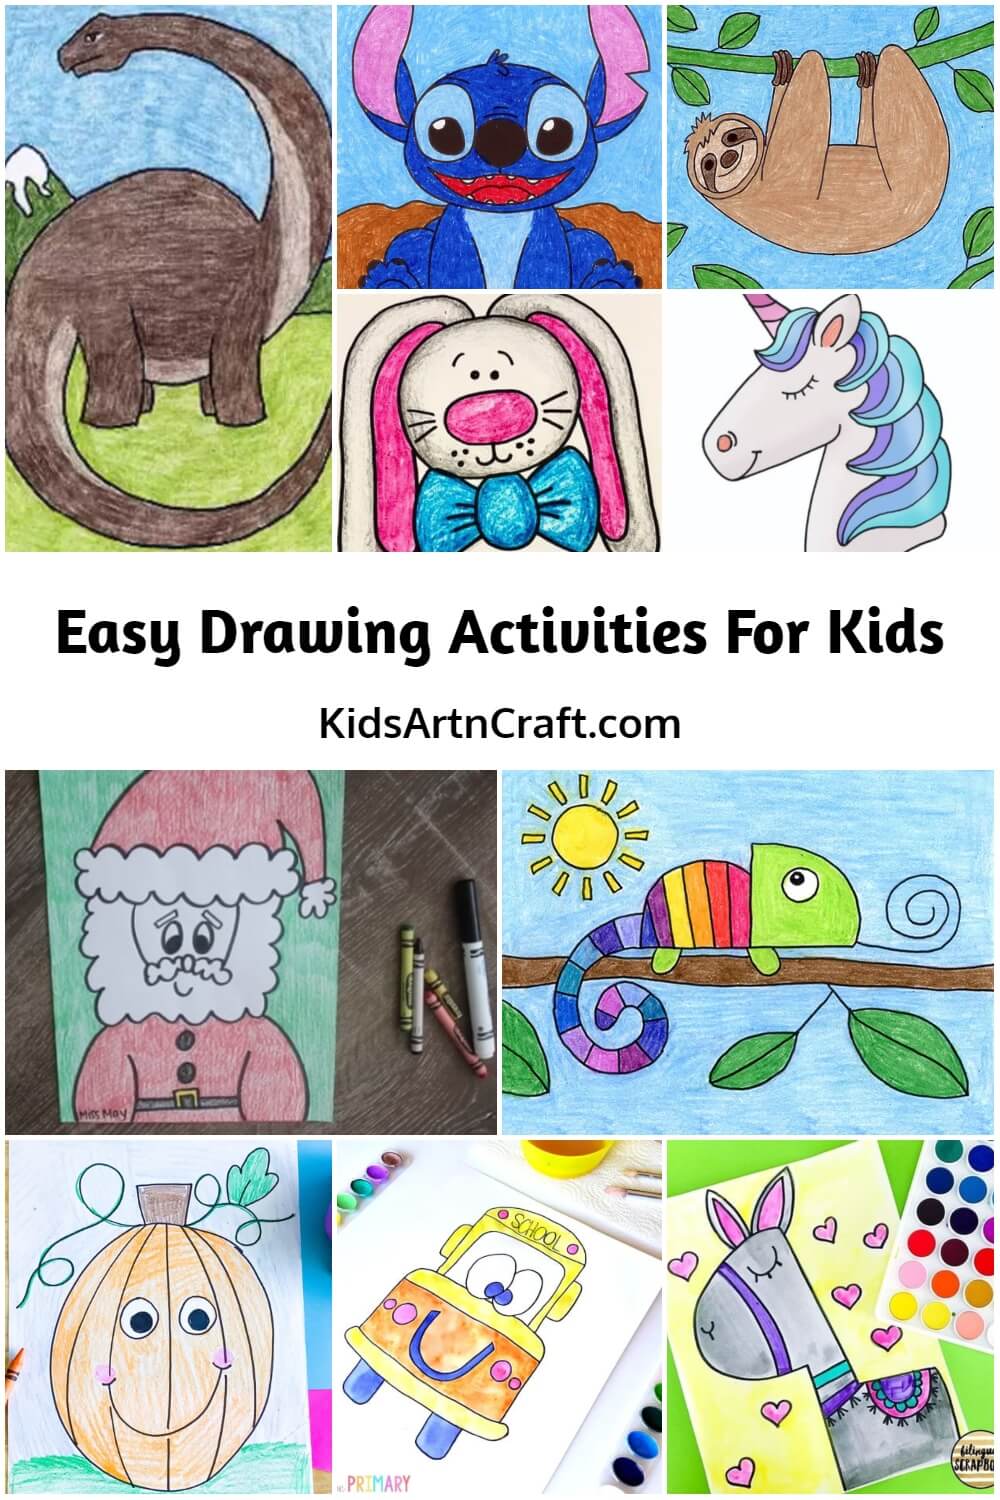 Easy Drawing Activities For Kids